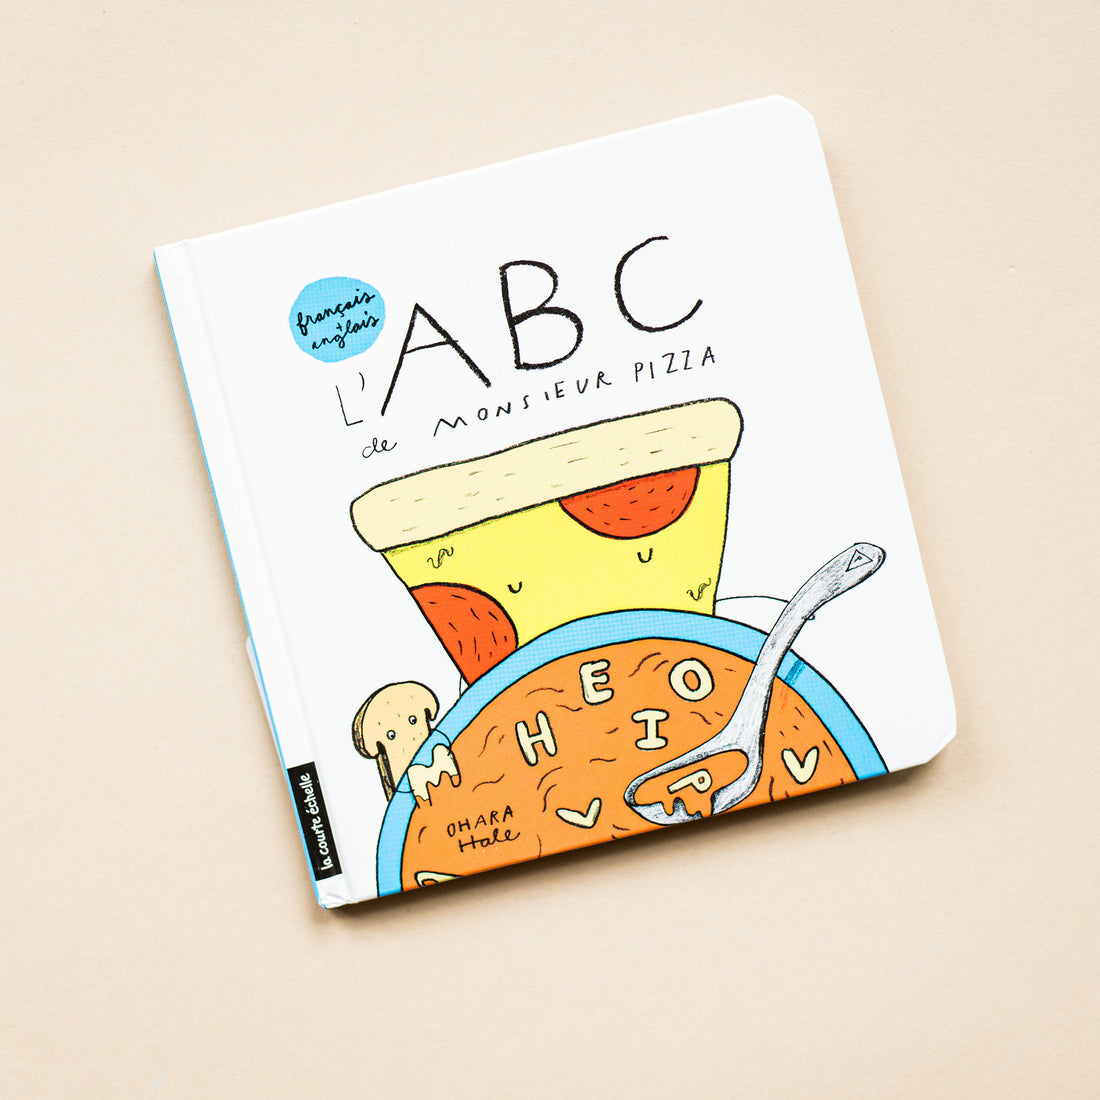 The ABCs of Mr. Pizza